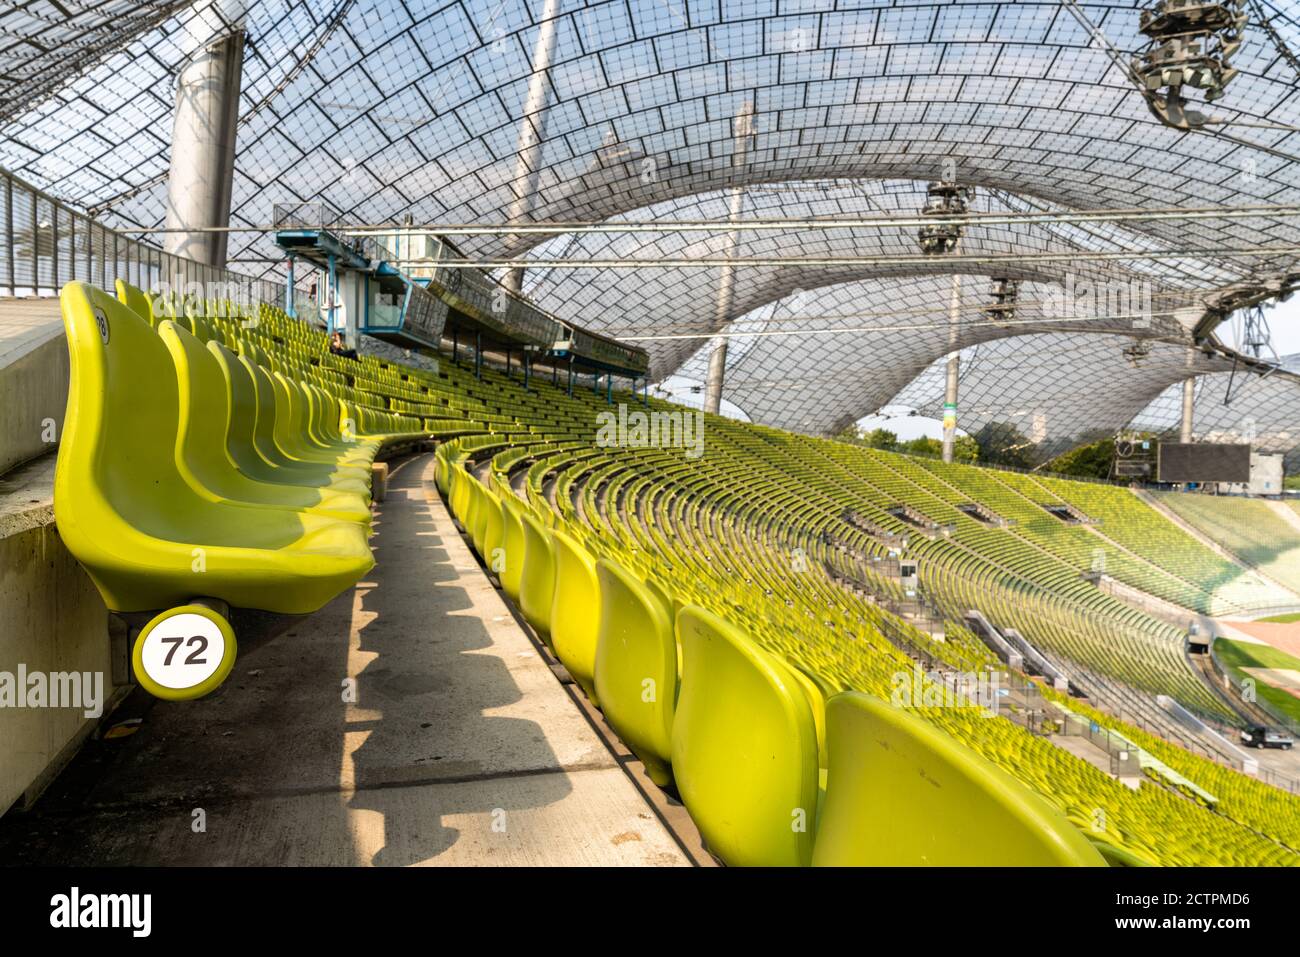 Munich, Bavaria / Germany - 17 September 2020: view of the 1972 Olympic Games stadium in Munich Stock Photo